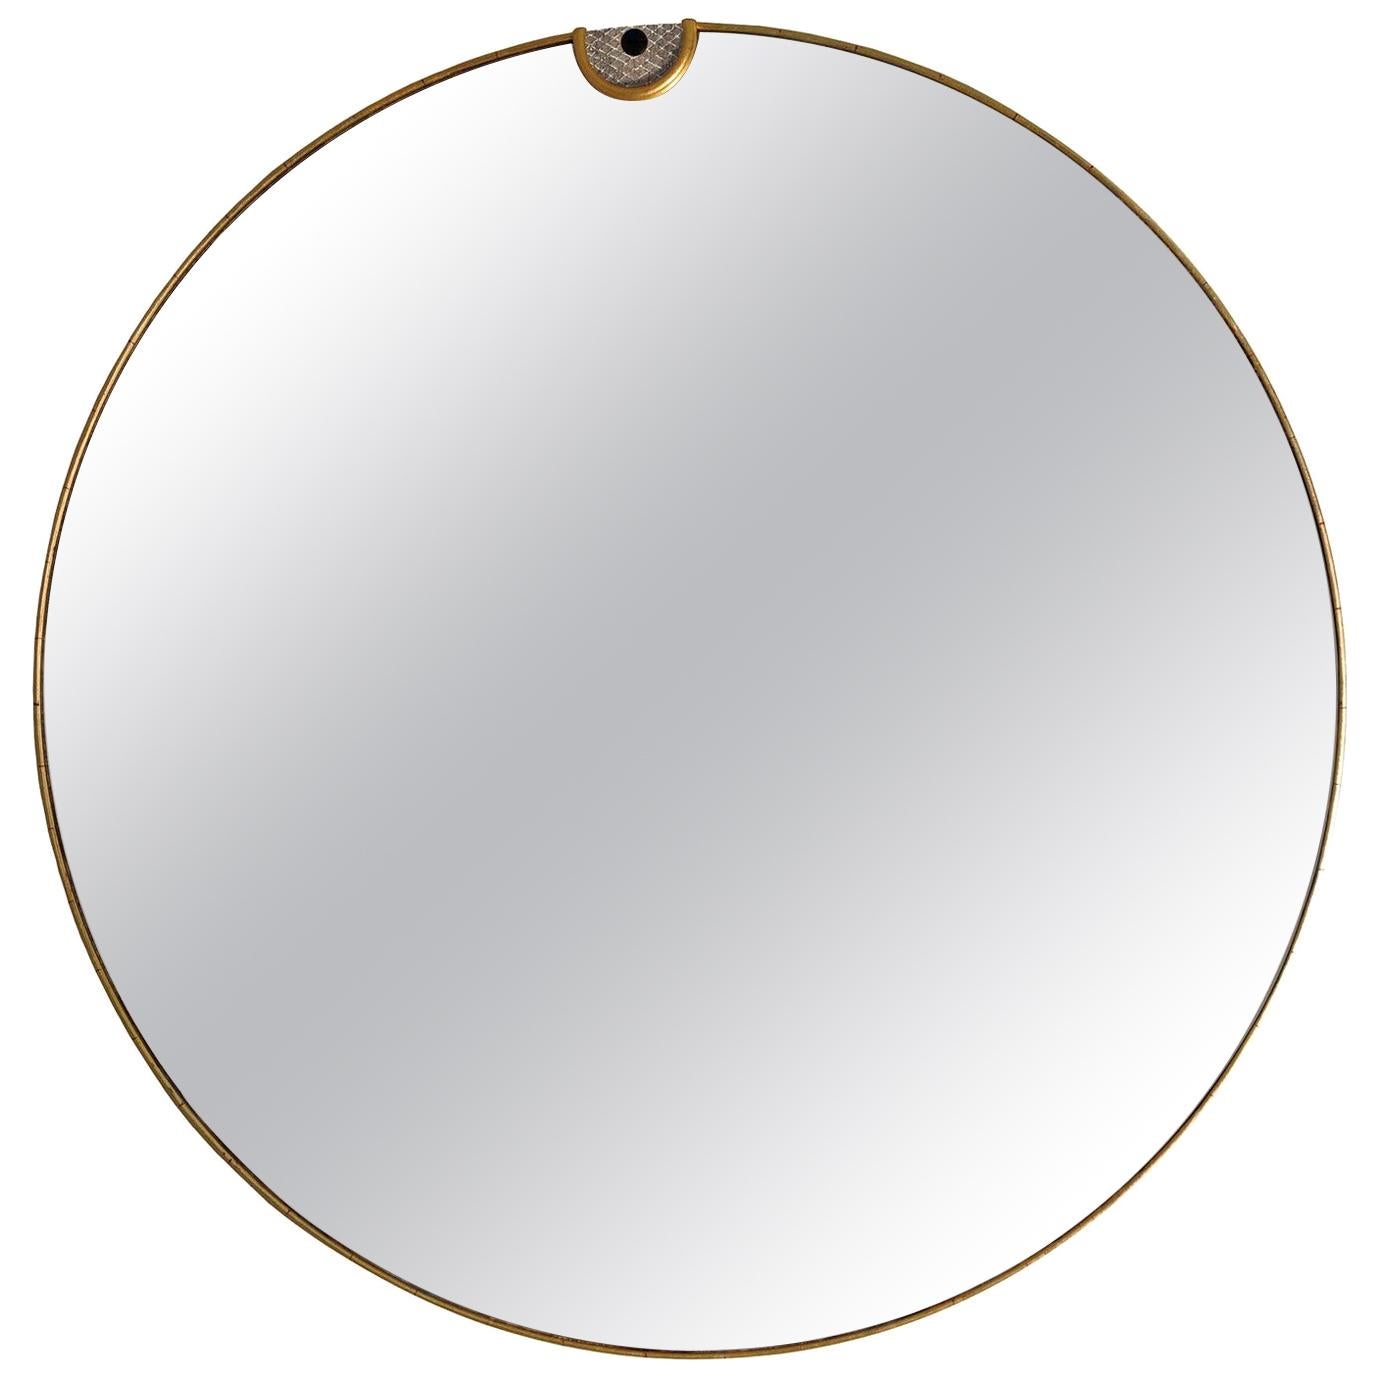 Spe 130 Mirror For Sale